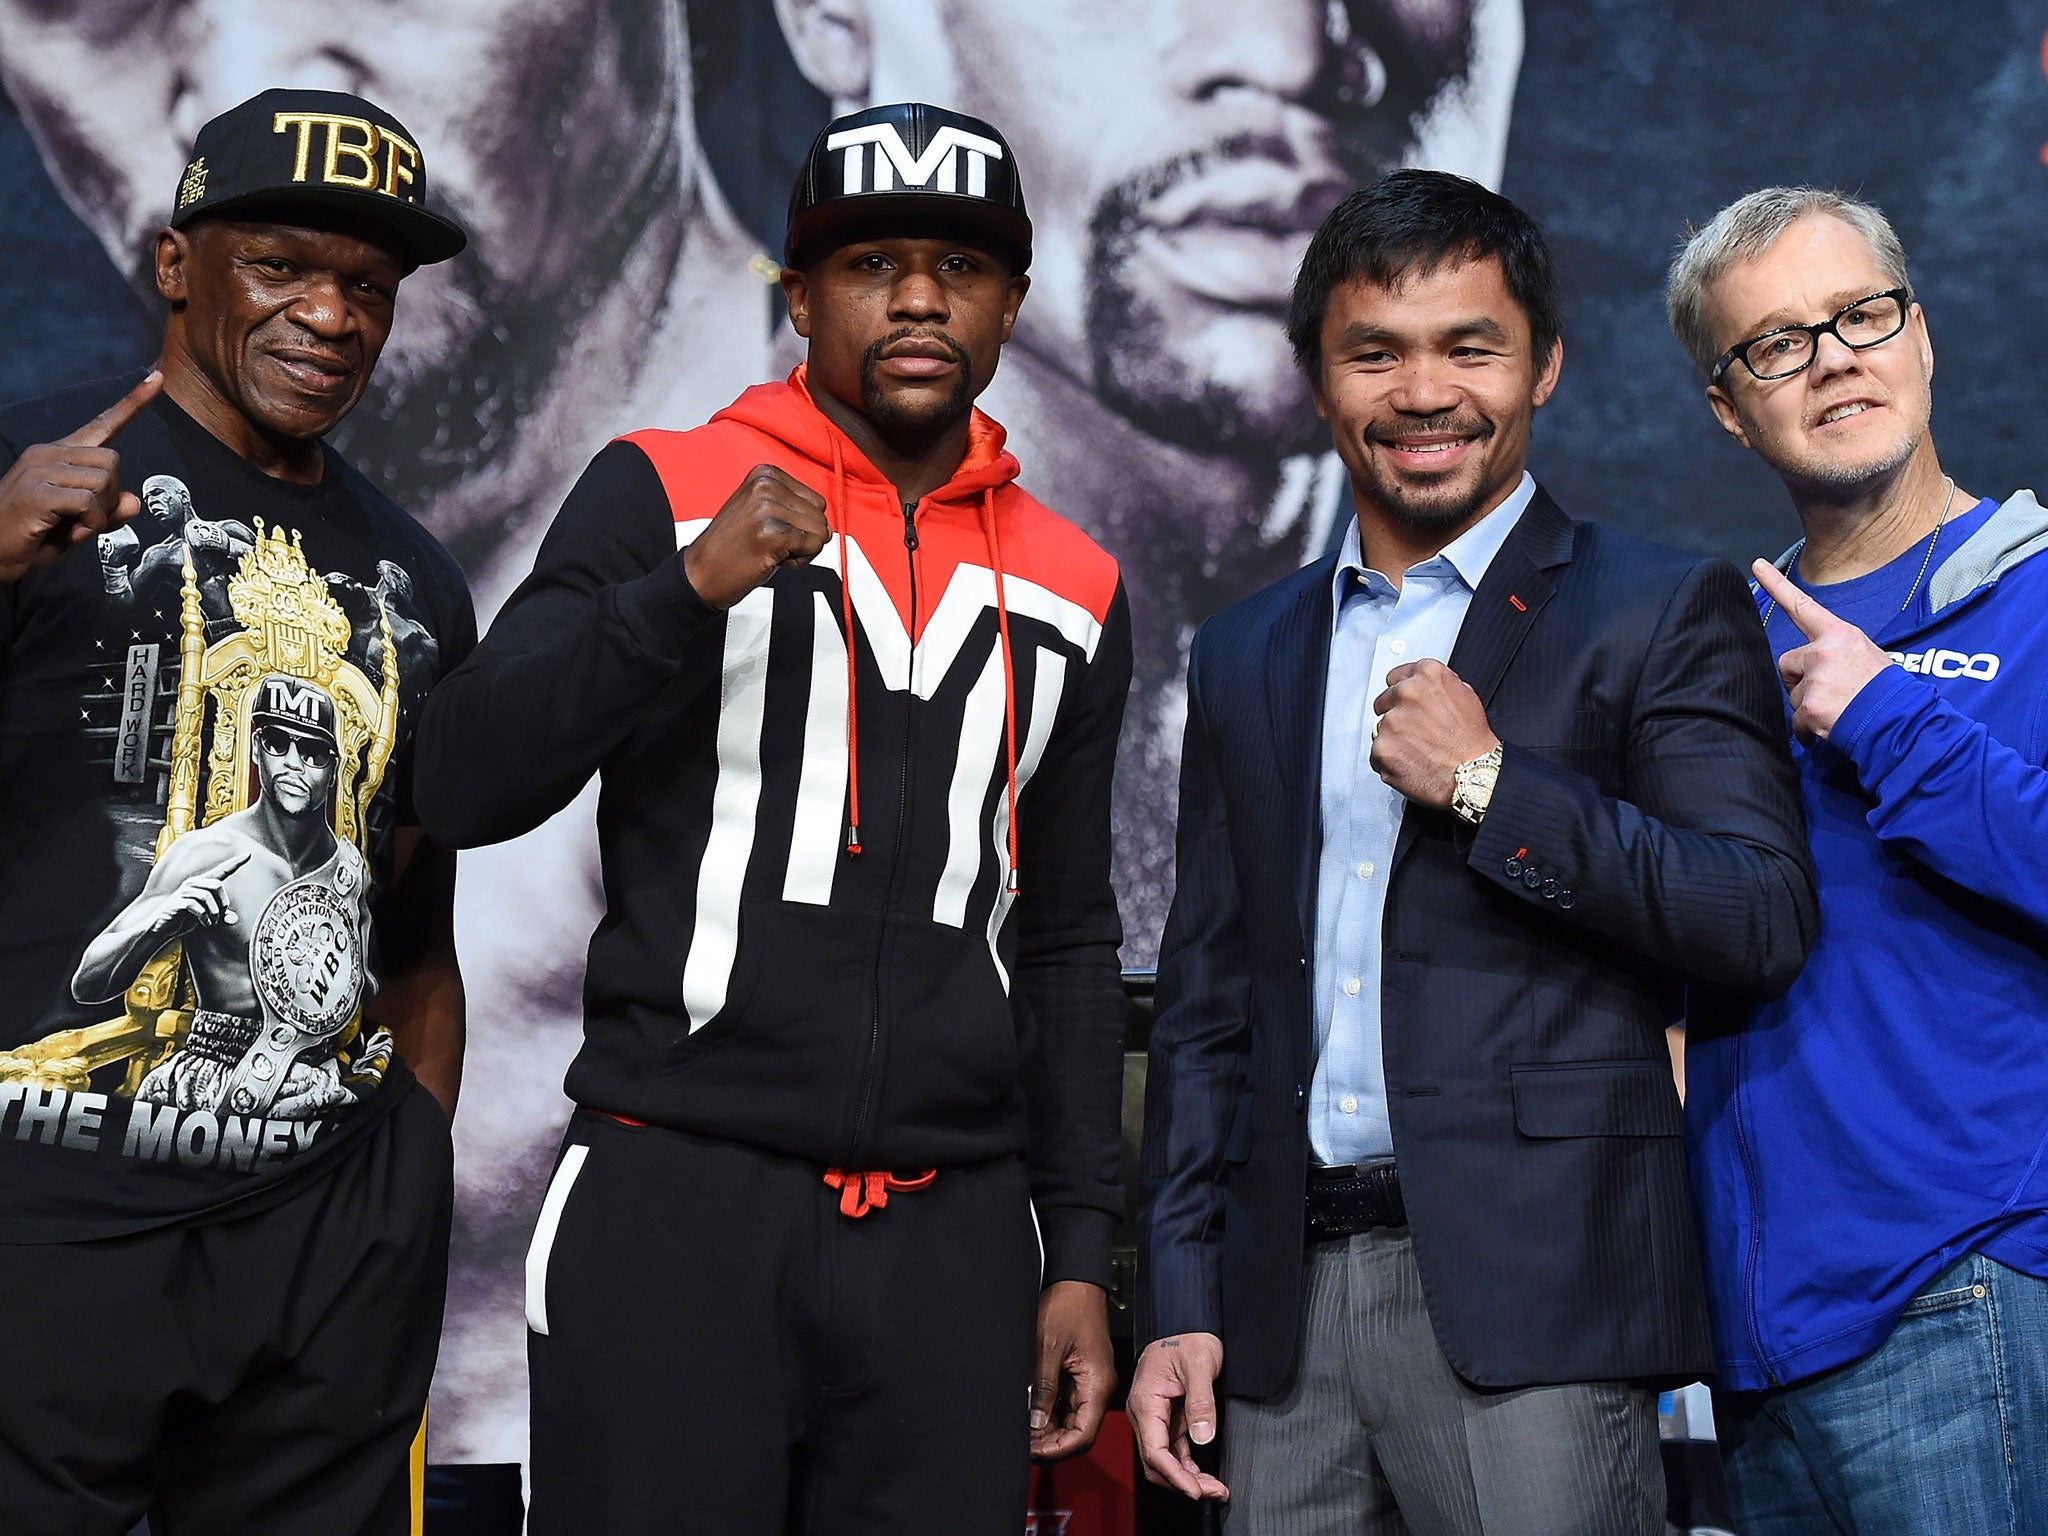 The trainers and the fighters - Floyd Mayweather Sr, Floyd Mayweather Jr, Manny Pacquiao and Freddie Roach